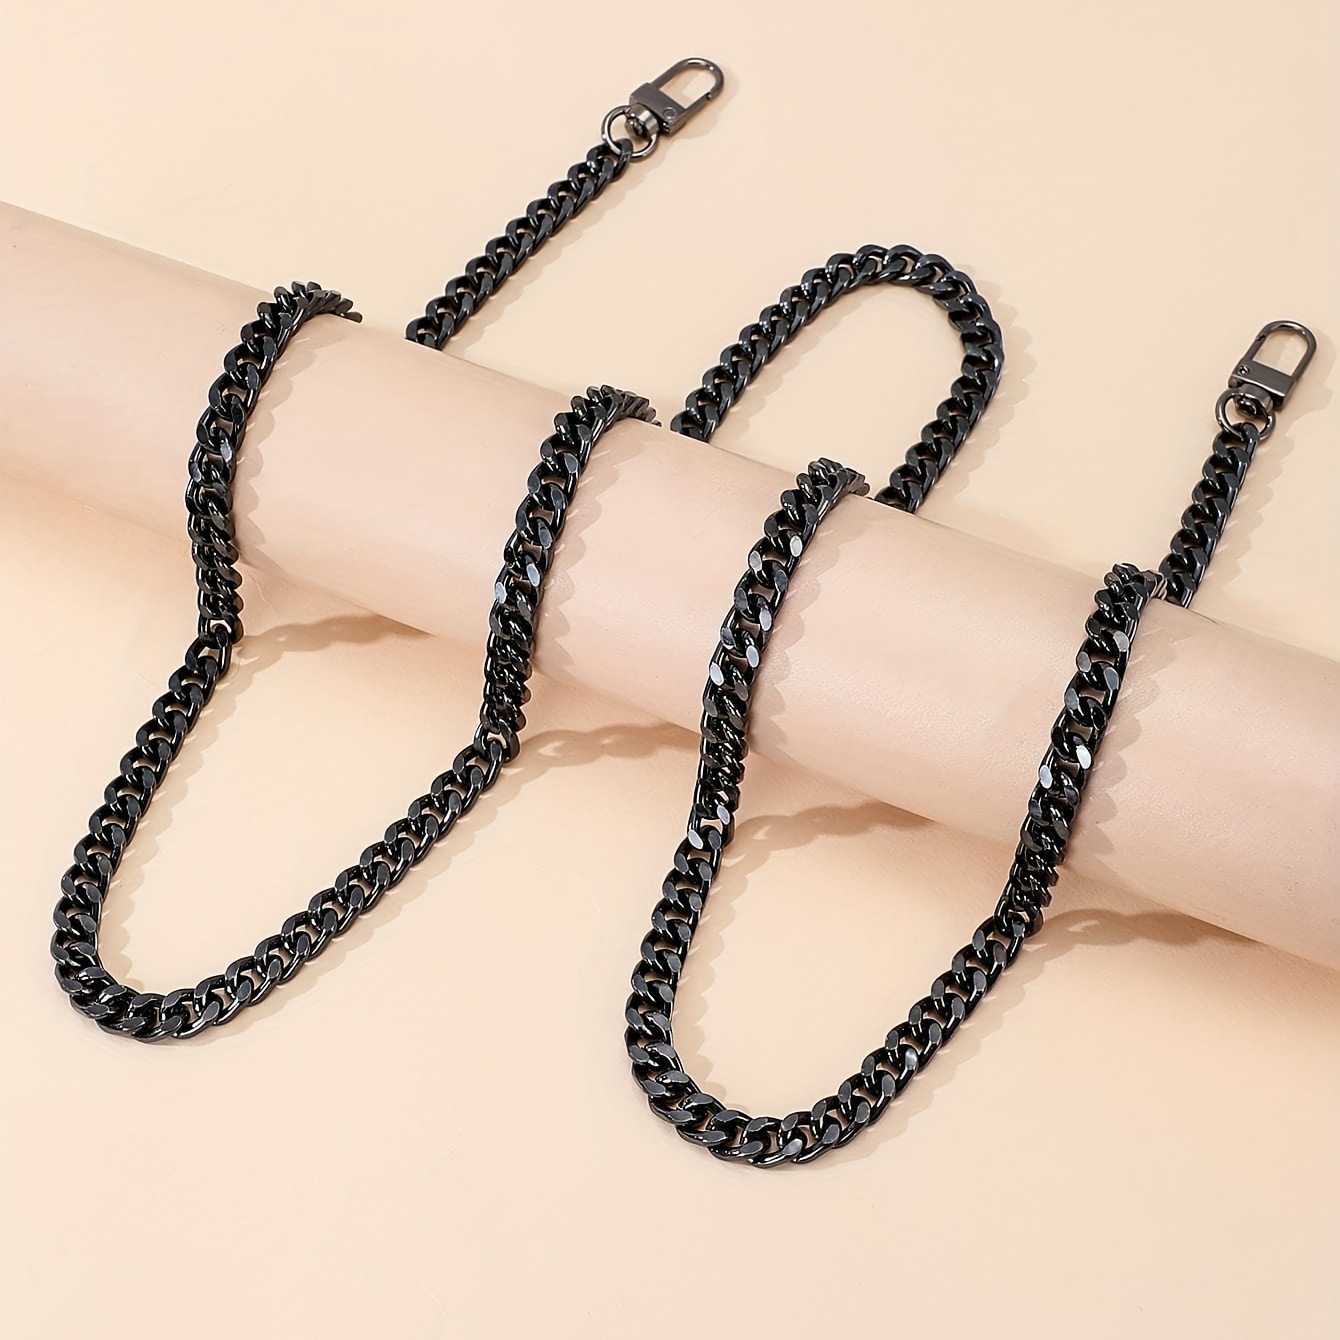 

1pc Simple Style Stainless Steel Black Bag Chain Twisted Chain Curb Chain For Diy Bag Strap Accessories Purse Chain Replacement